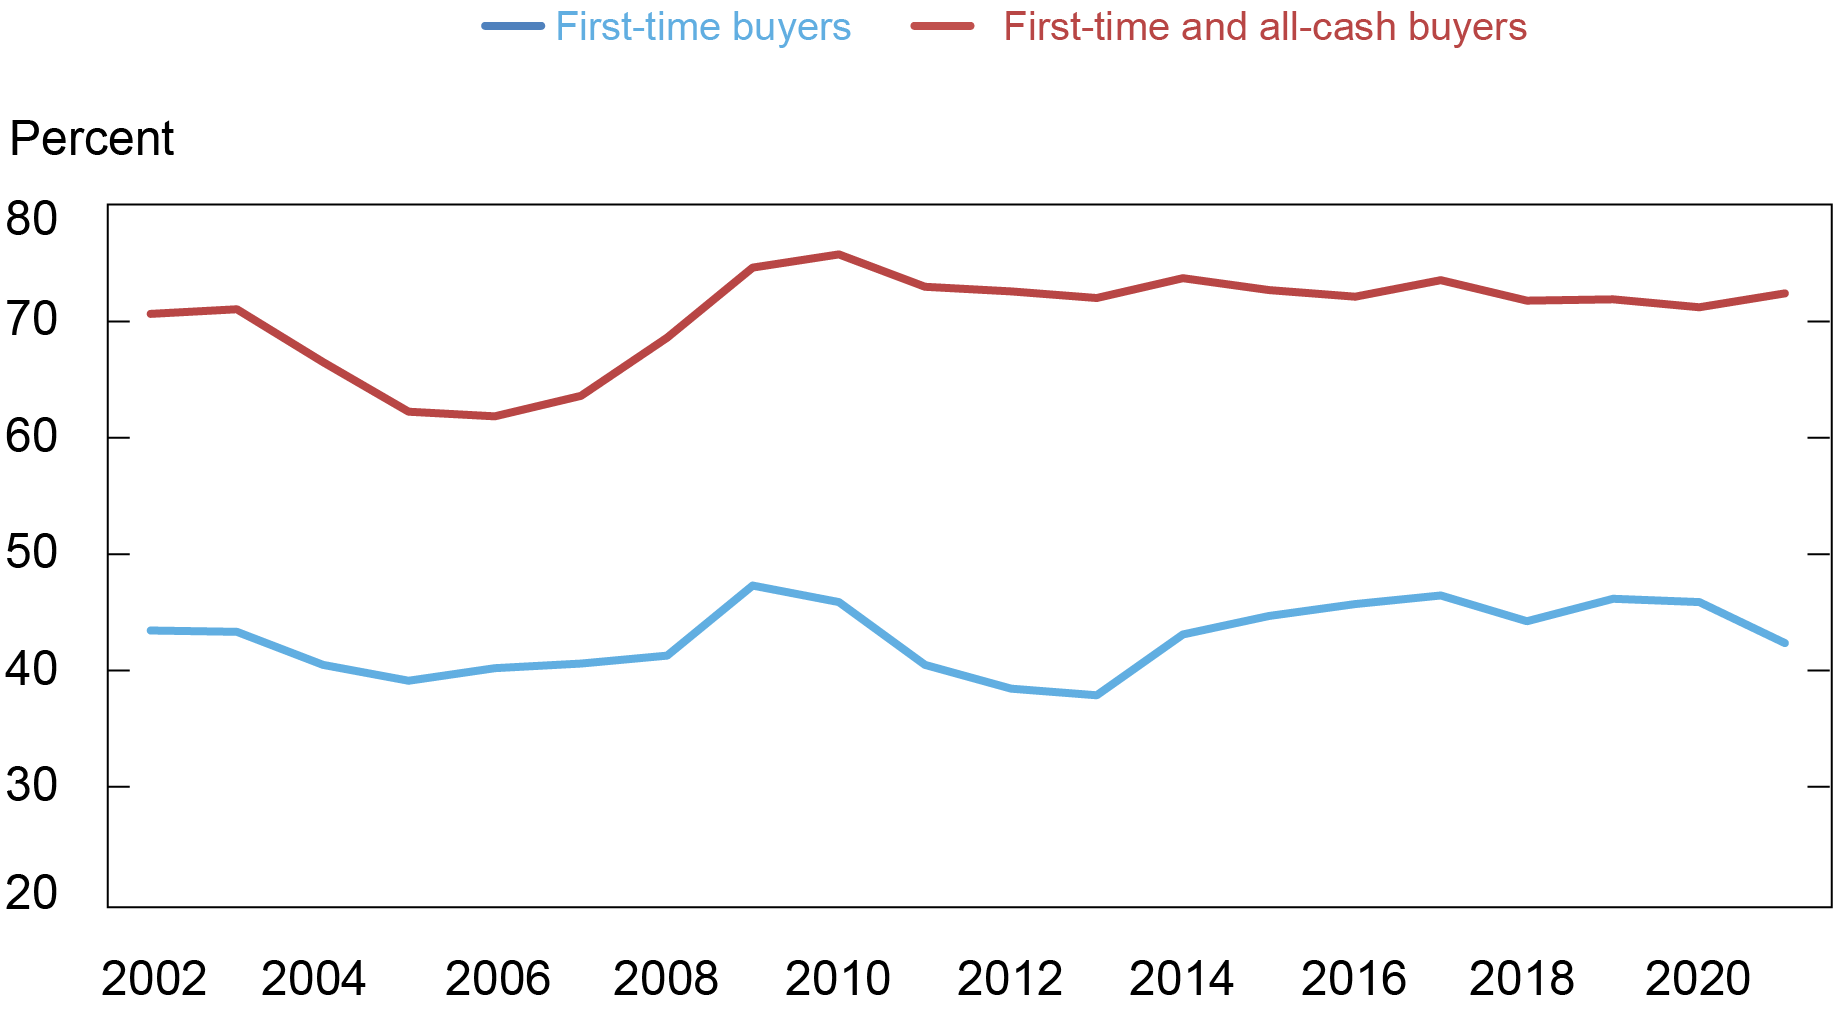 First-Time Homebuyers are Driving the Market Forward - Freddie Mac